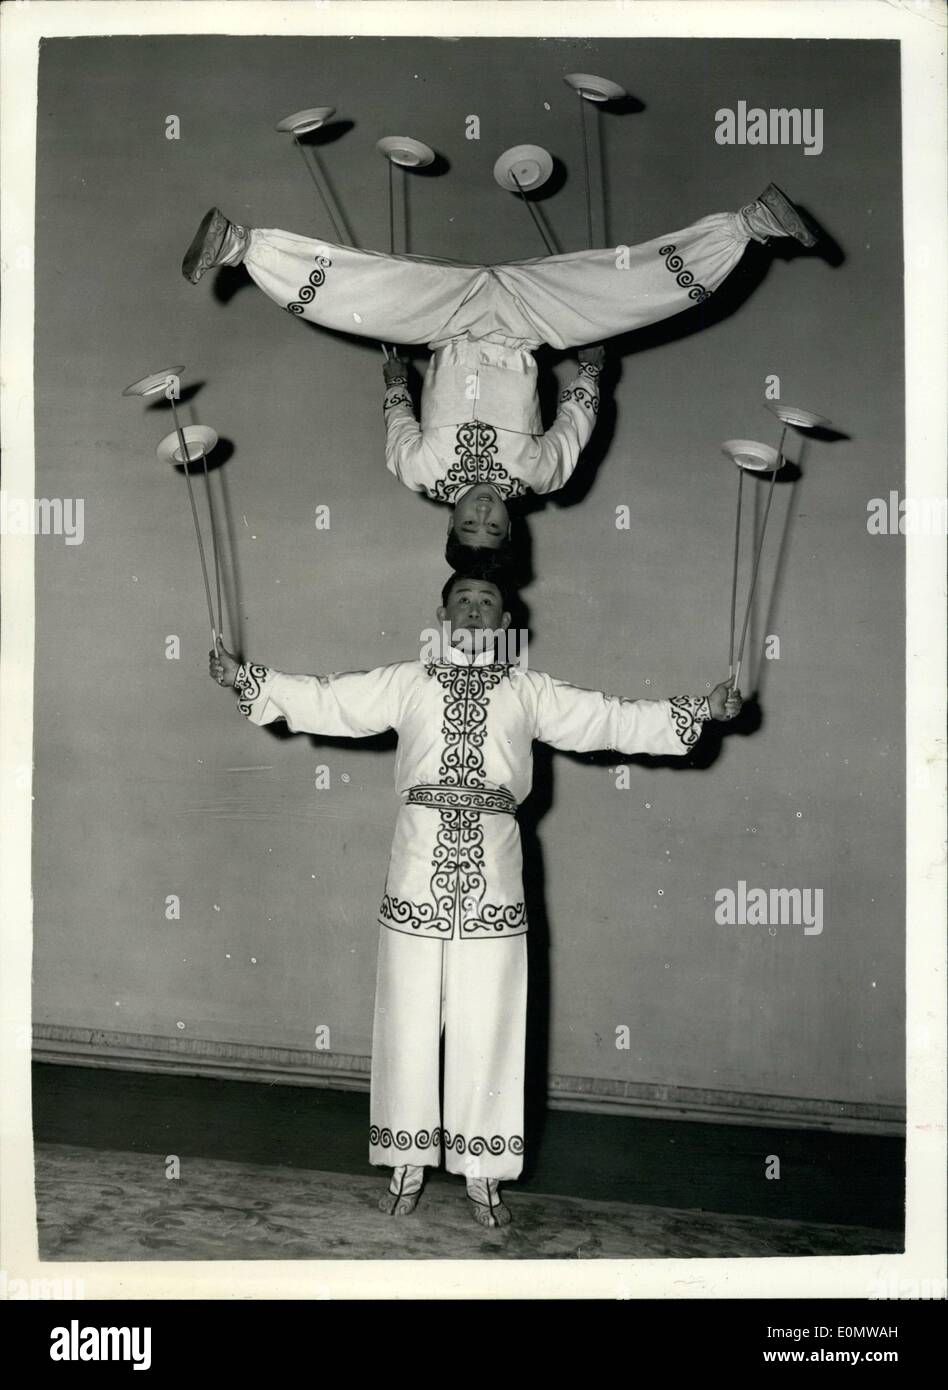 Sep. 09, 1956 - Variety Theatre of China Rehearsals: Artists of the Variety Theatre of China, which tonight begins its three-week London season at the Princes Theatre, were to be seen rehearsing today. Photo shows: Rehearsing their balancing ''plate-spinning'' act - are TSAI CHUN (top) and Wang Wen Chieh, at the Princes Theatre today. Stock Photo